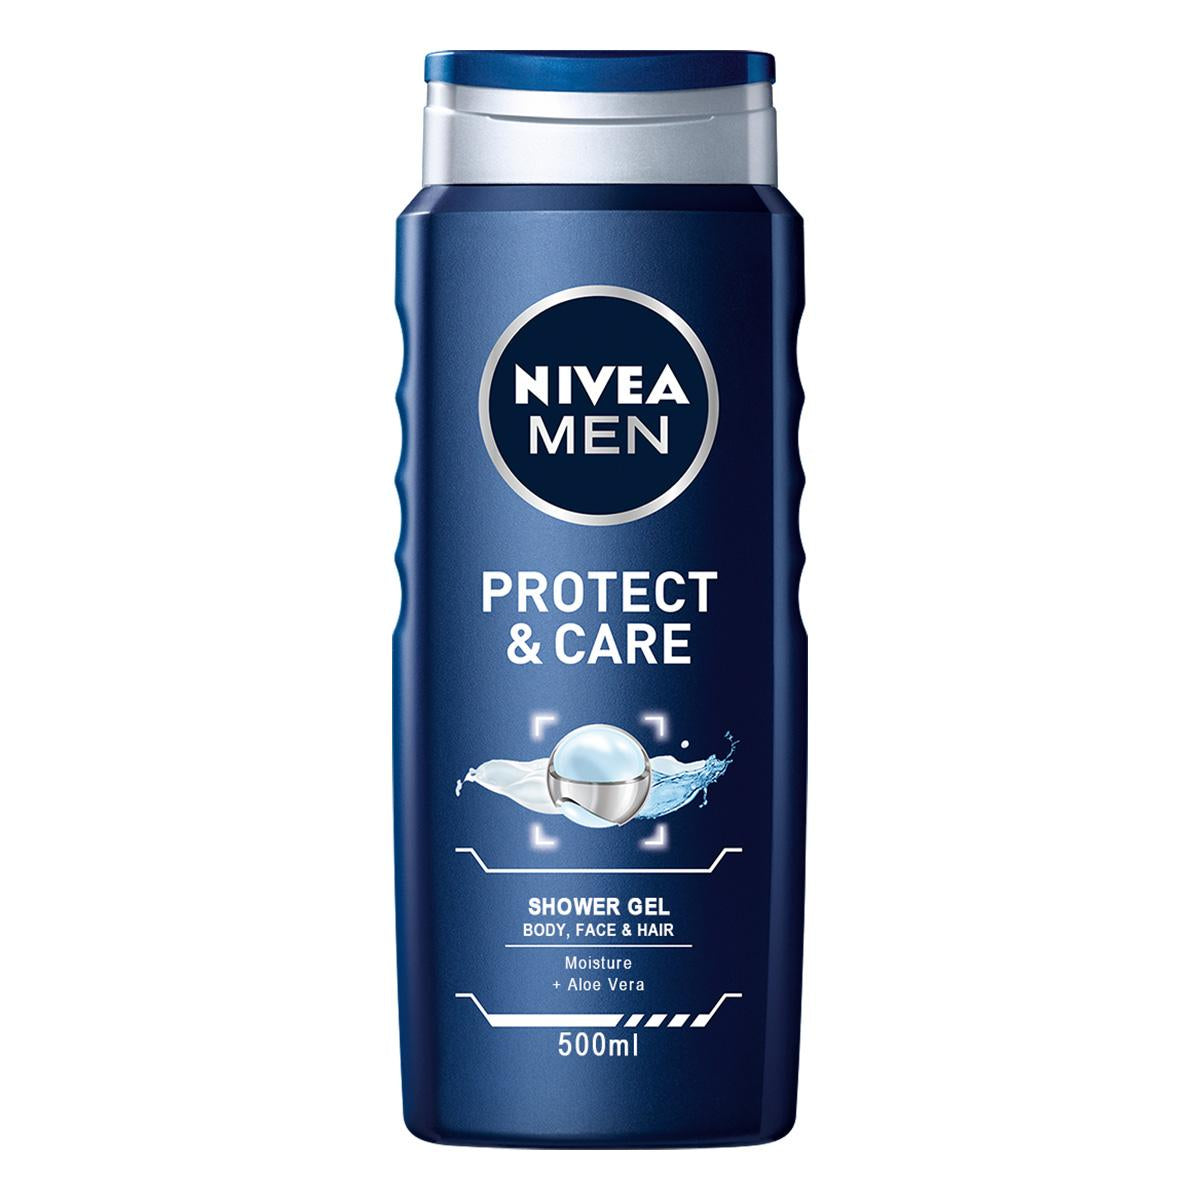 Primary image of Protect and Care Shower Gel